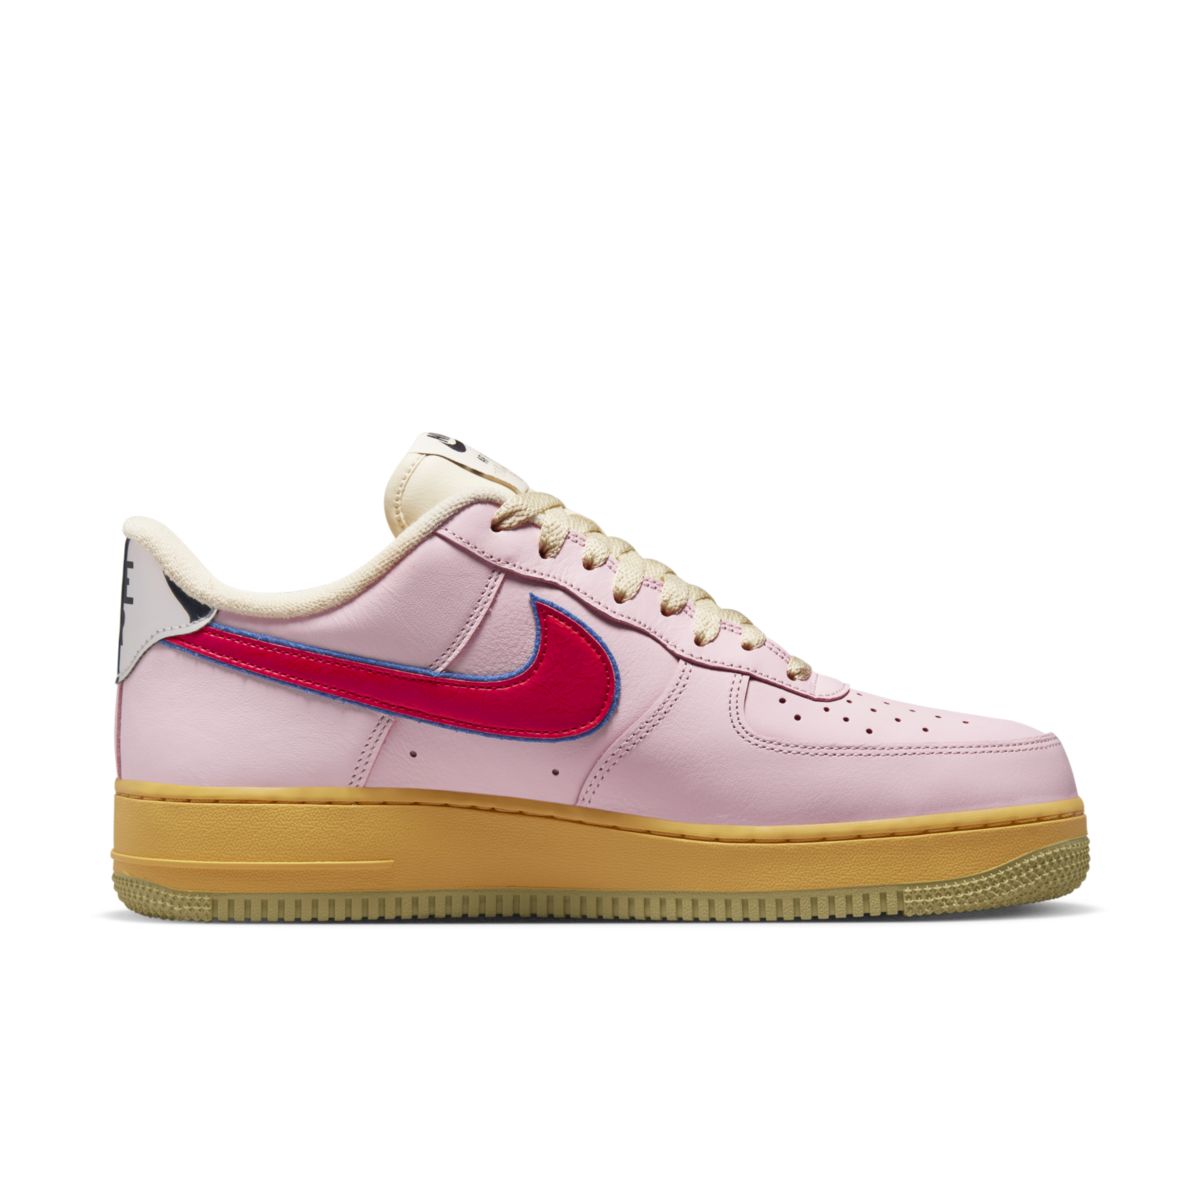 Nike Air Force 1 Low Feel Free Lets Talk DX2667-600 3